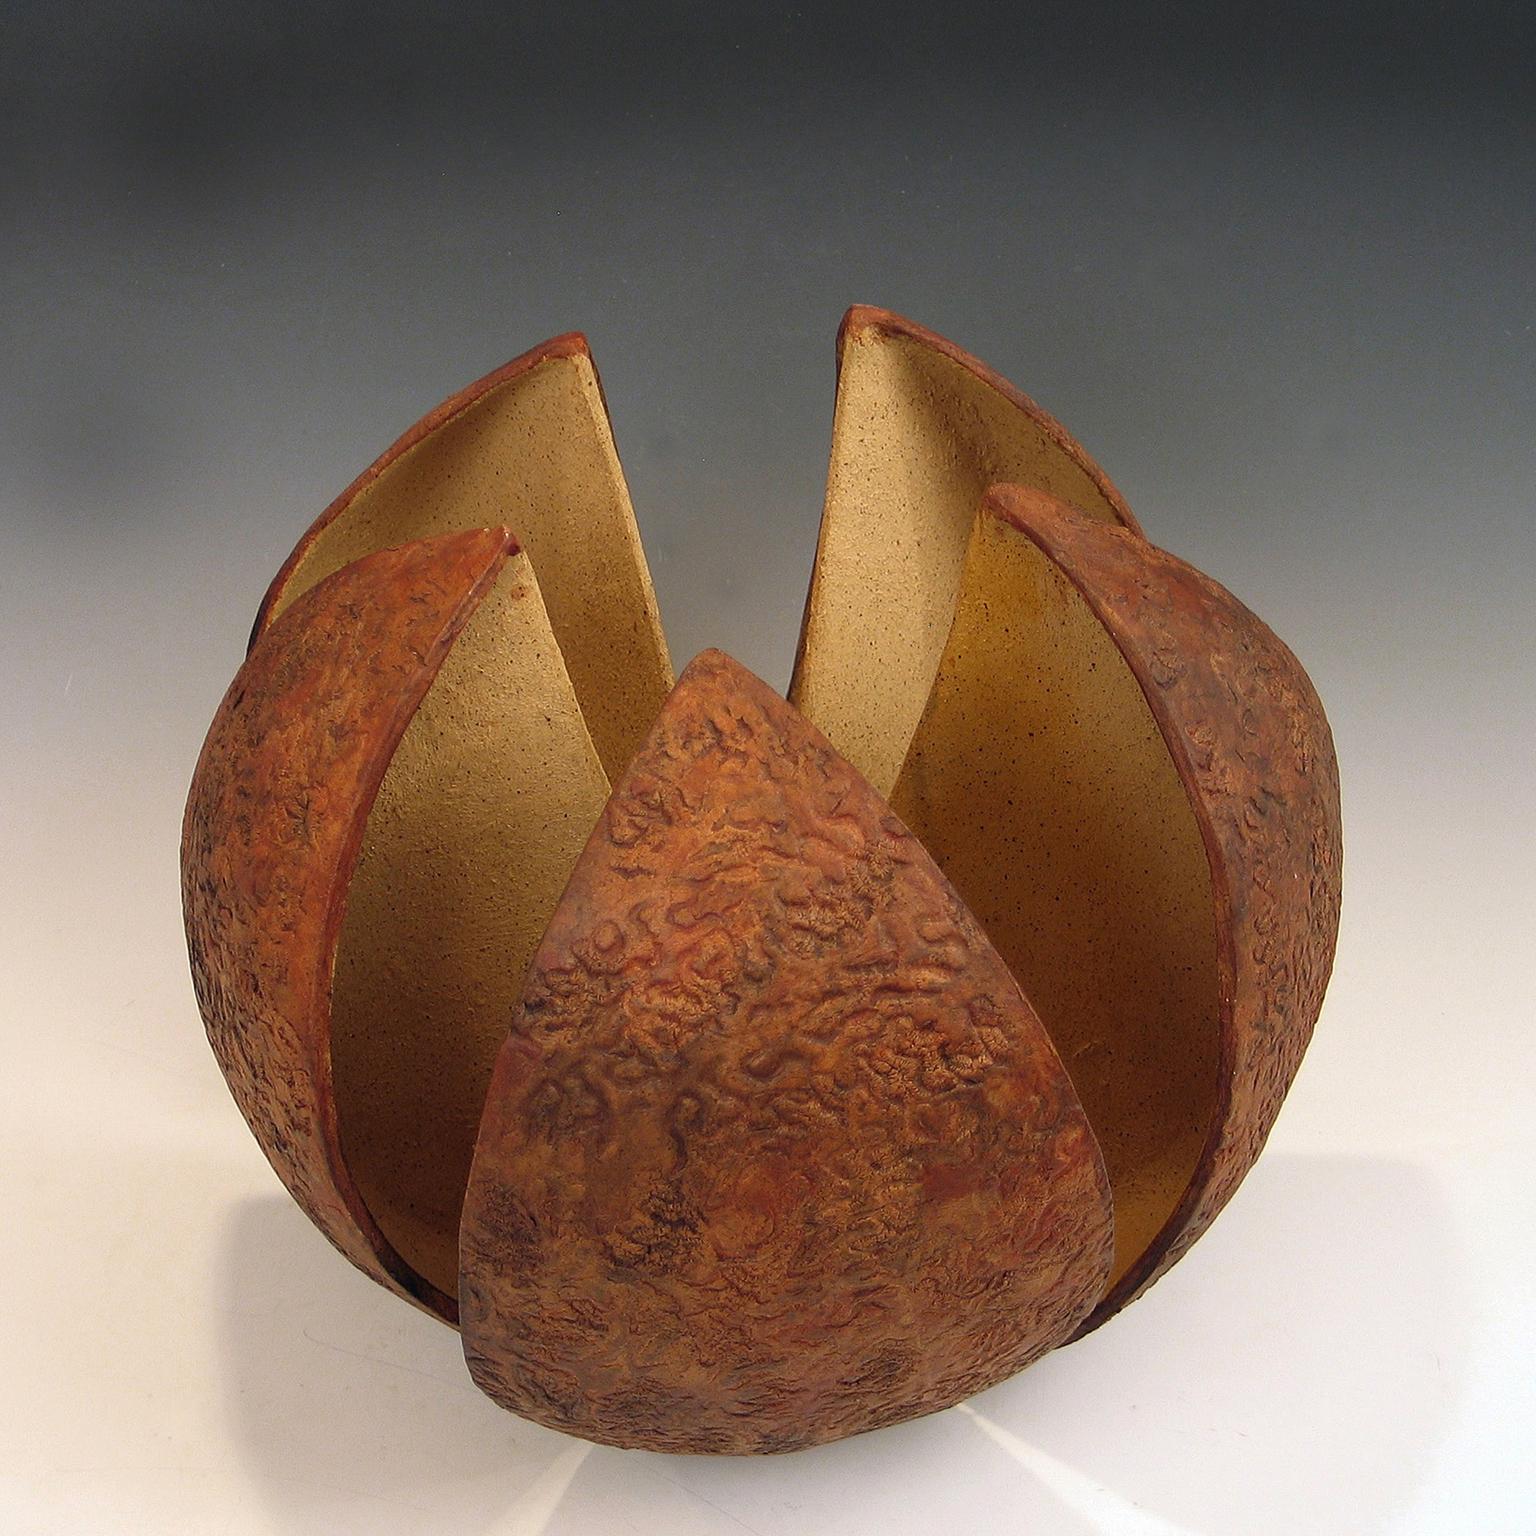 “Anemone”, reveals ceramic petals in natural tones - Abstract Sculpture by Elaine Lorenz